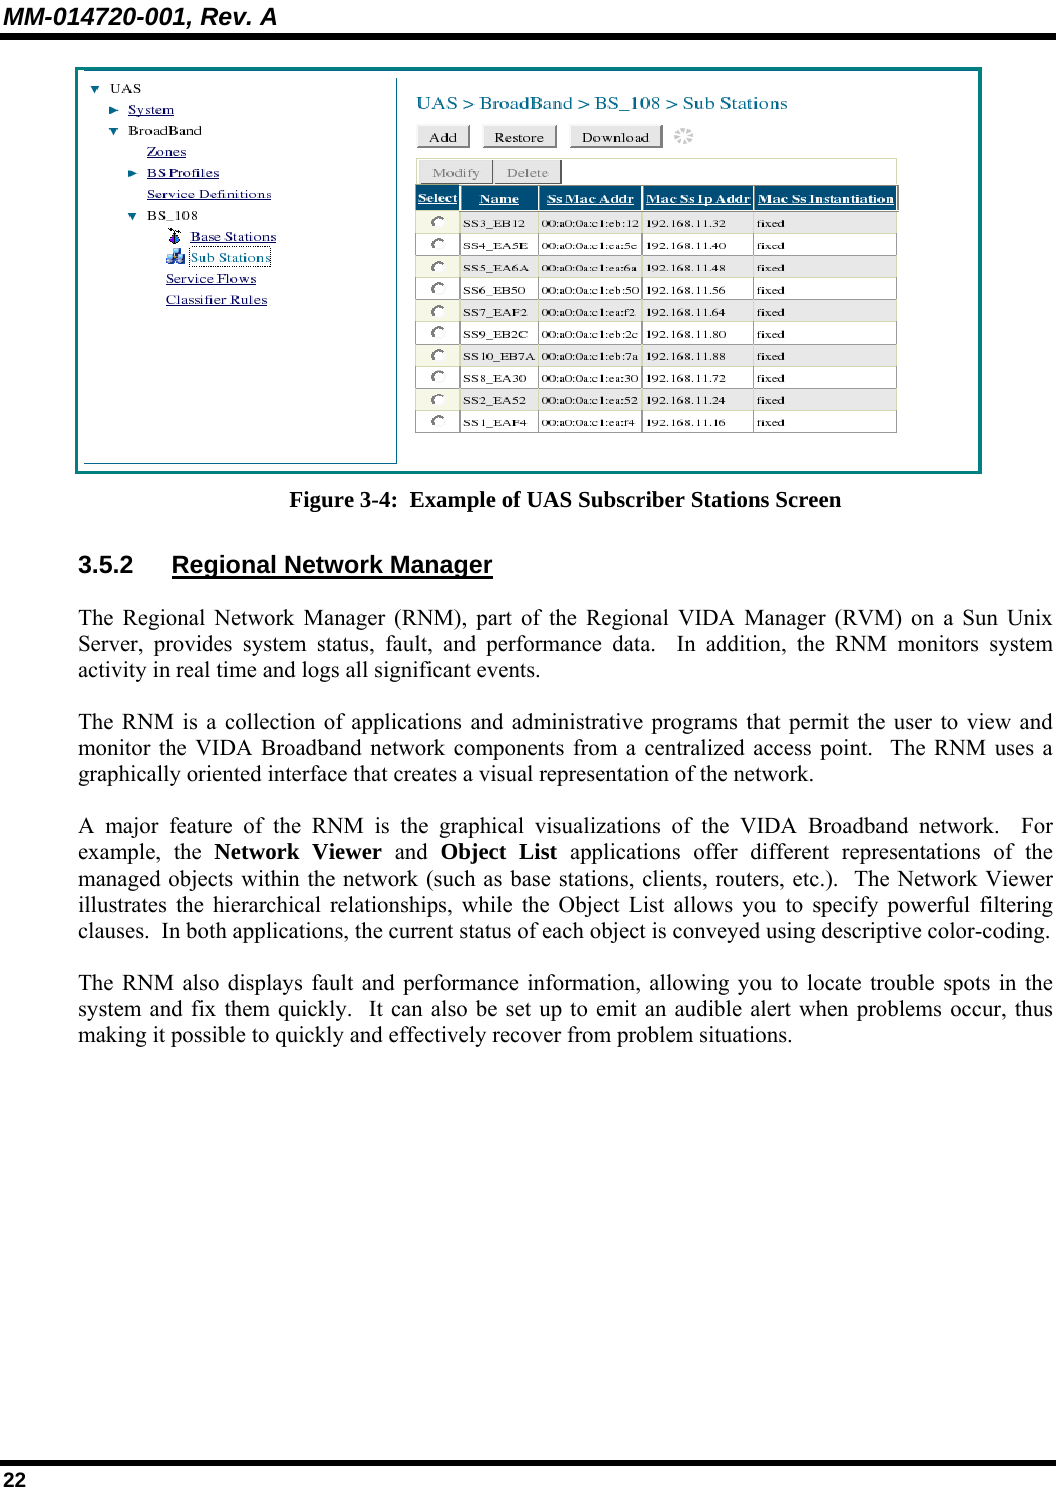 MM-014720-001, Rev. A 22  Figure 3-4:  Example of UAS Subscriber Stations Screen 3.5.2 Regional Network Manager The Regional Network Manager (RNM), part of the Regional VIDA Manager (RVM) on a Sun Unix Server, provides system status, fault, and performance data.  In addition, the RNM monitors system activity in real time and logs all significant events.   The RNM is a collection of applications and administrative programs that permit the user to view and monitor the VIDA Broadband network components from a centralized access point.  The RNM uses a graphically oriented interface that creates a visual representation of the network. A major feature of the RNM is the graphical visualizations of the VIDA Broadband network.  For example, the Network Viewer and  Object List applications offer different representations of the managed objects within the network (such as base stations, clients, routers, etc.).  The Network Viewer illustrates the hierarchical relationships, while the Object List allows you to specify powerful filtering clauses.  In both applications, the current status of each object is conveyed using descriptive color-coding. The RNM also displays fault and performance information, allowing you to locate trouble spots in the system and fix them quickly.  It can also be set up to emit an audible alert when problems occur, thus making it possible to quickly and effectively recover from problem situations. 